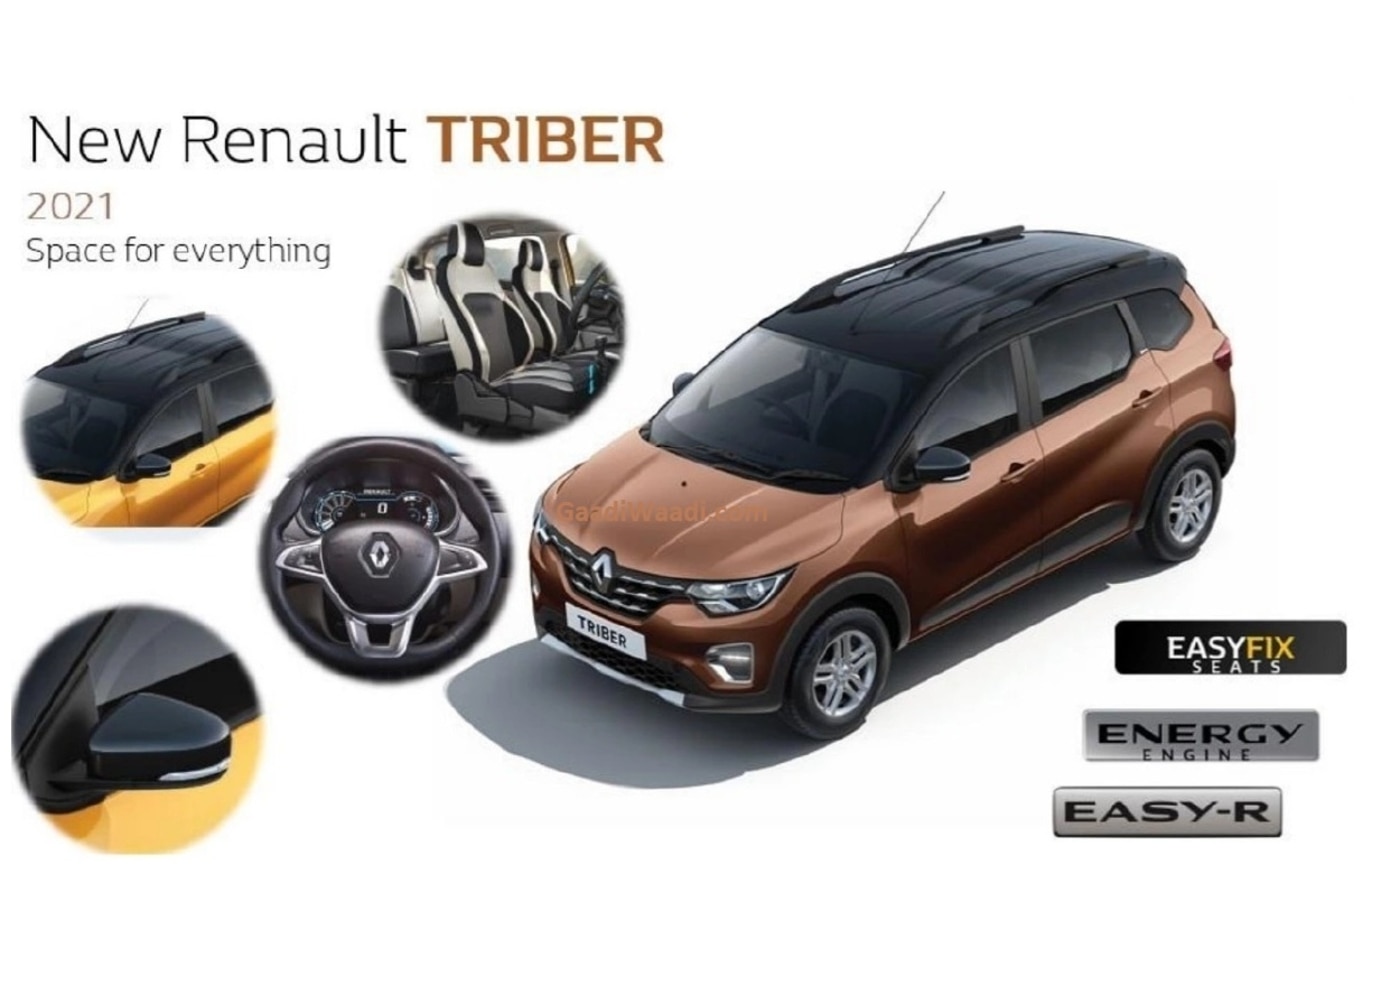 Renault Triber 7 Seat Crossover MPV - Interior and Exterior !! - YouTube